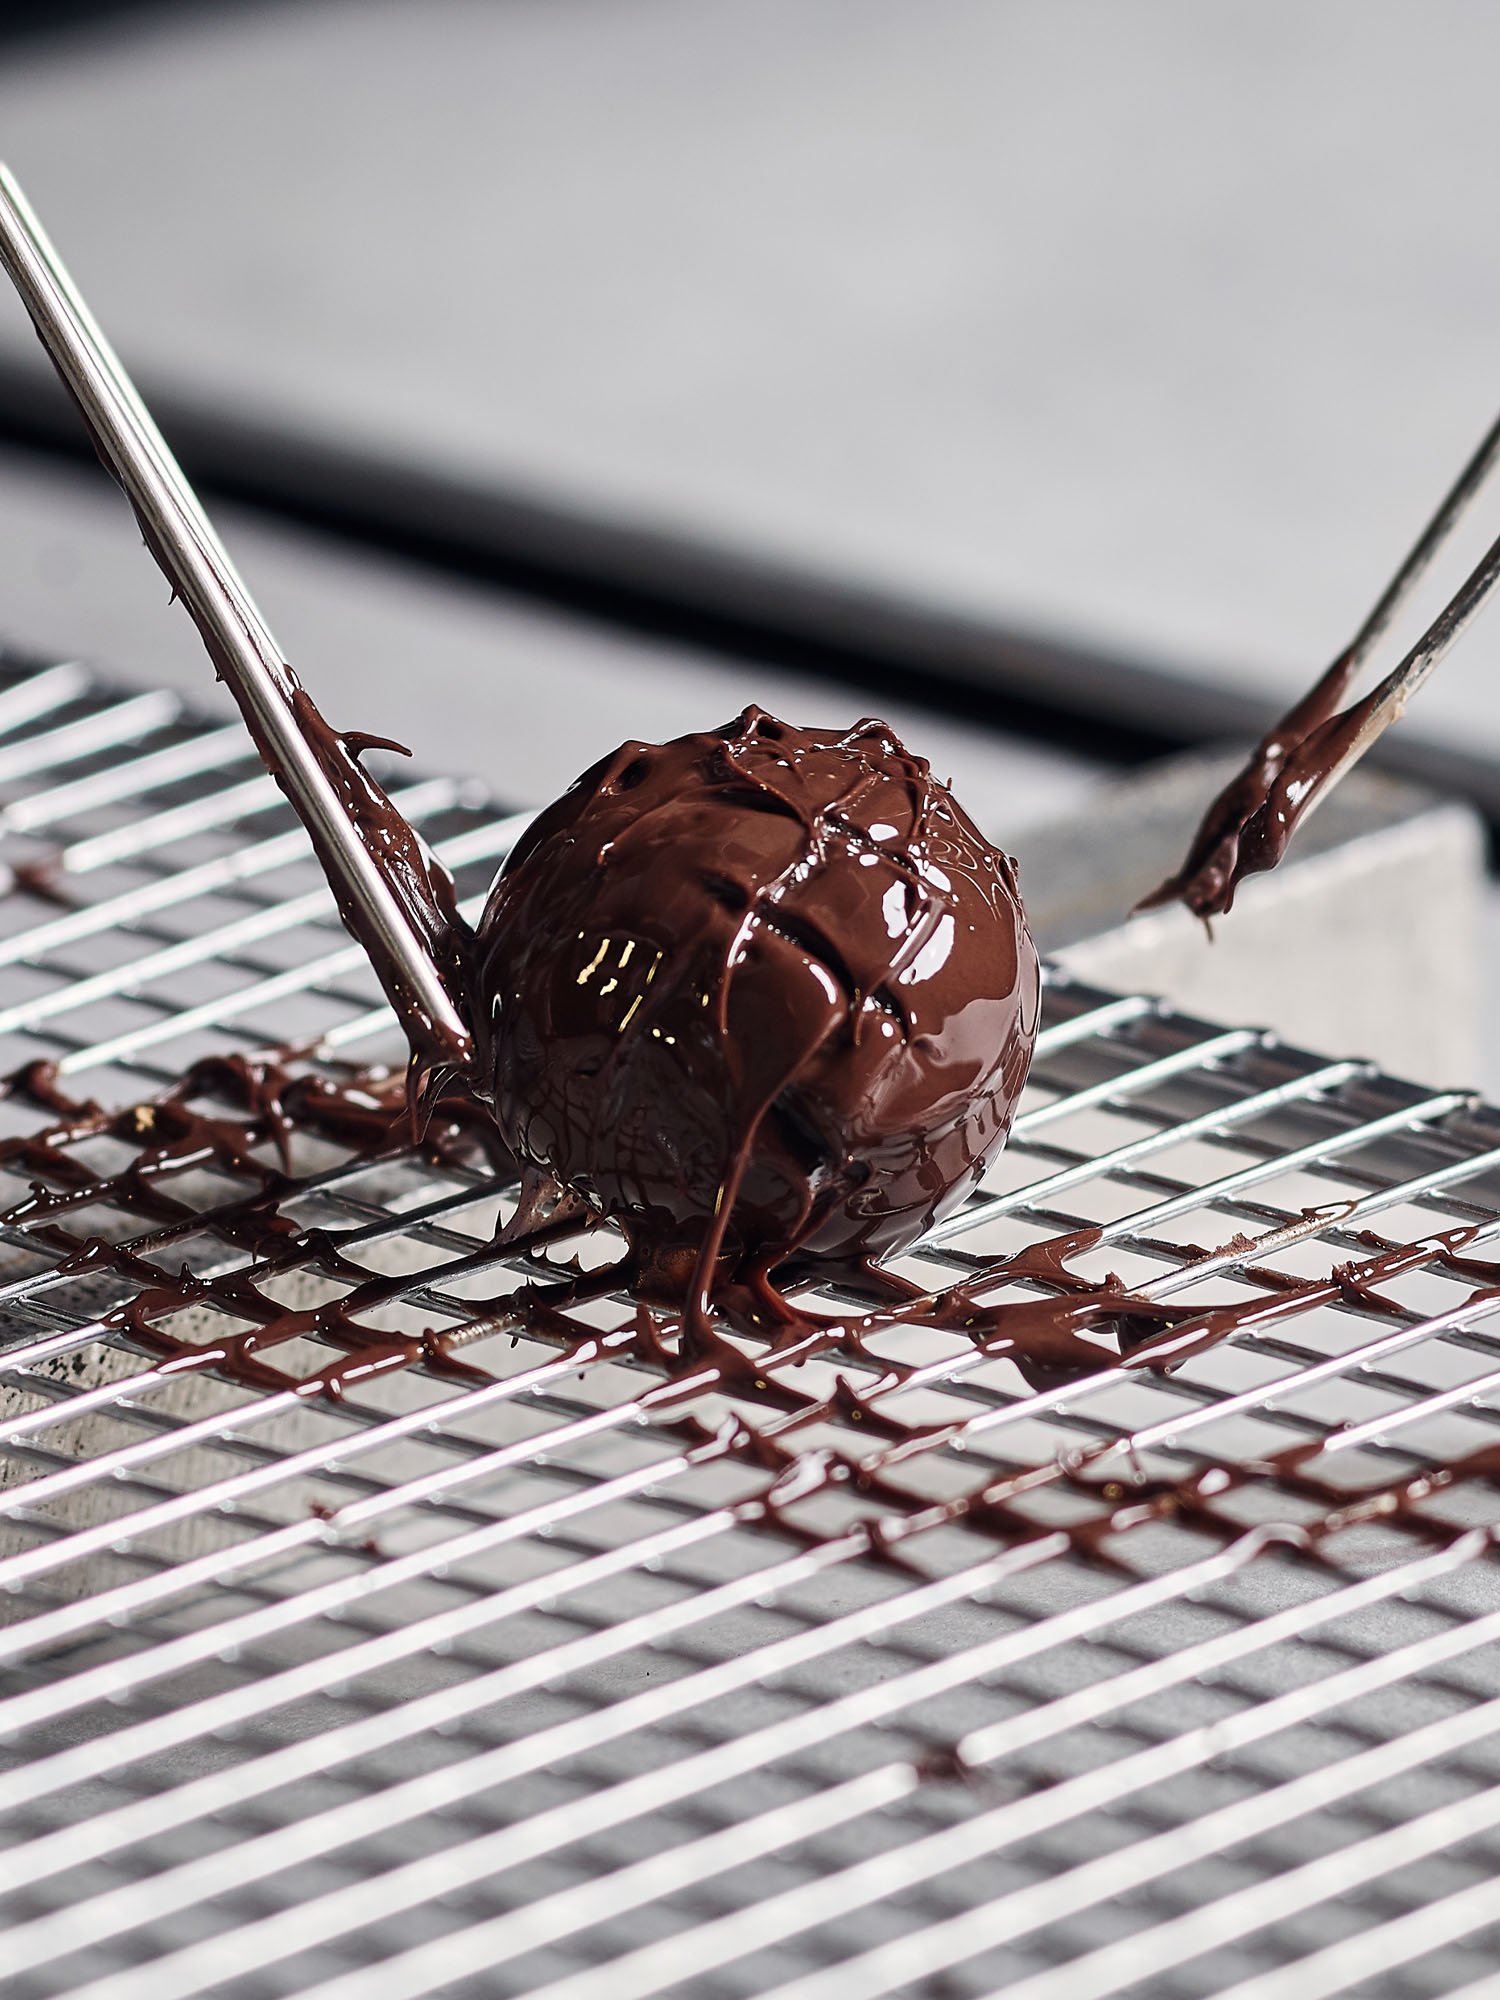 Discover the uniqe chocolate truffles "Truffes Origine" from Thomas Müller Chocolatier online now.